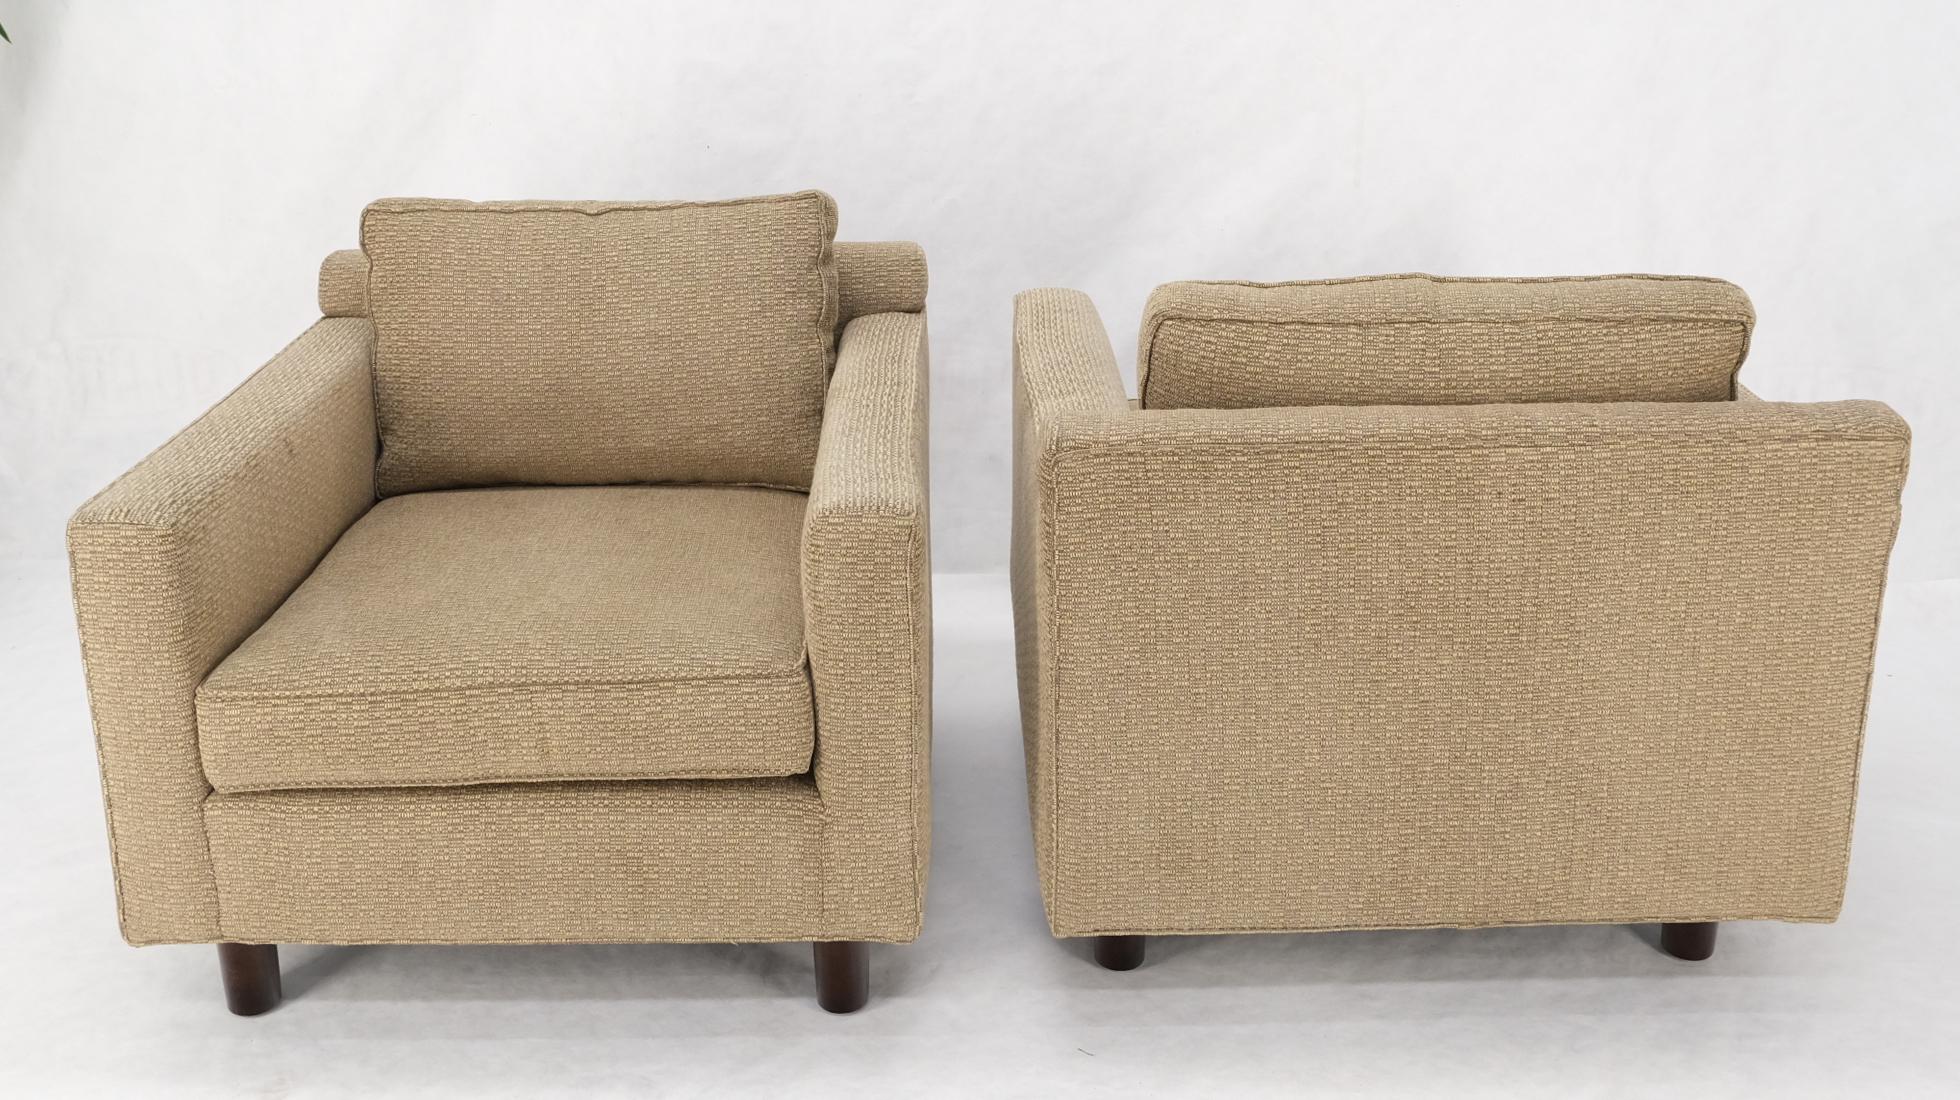 Pair Deep Seat Oatmeal Fabric Upholstery Contemporary Lounge Chair on Dowel Legs For Sale 11